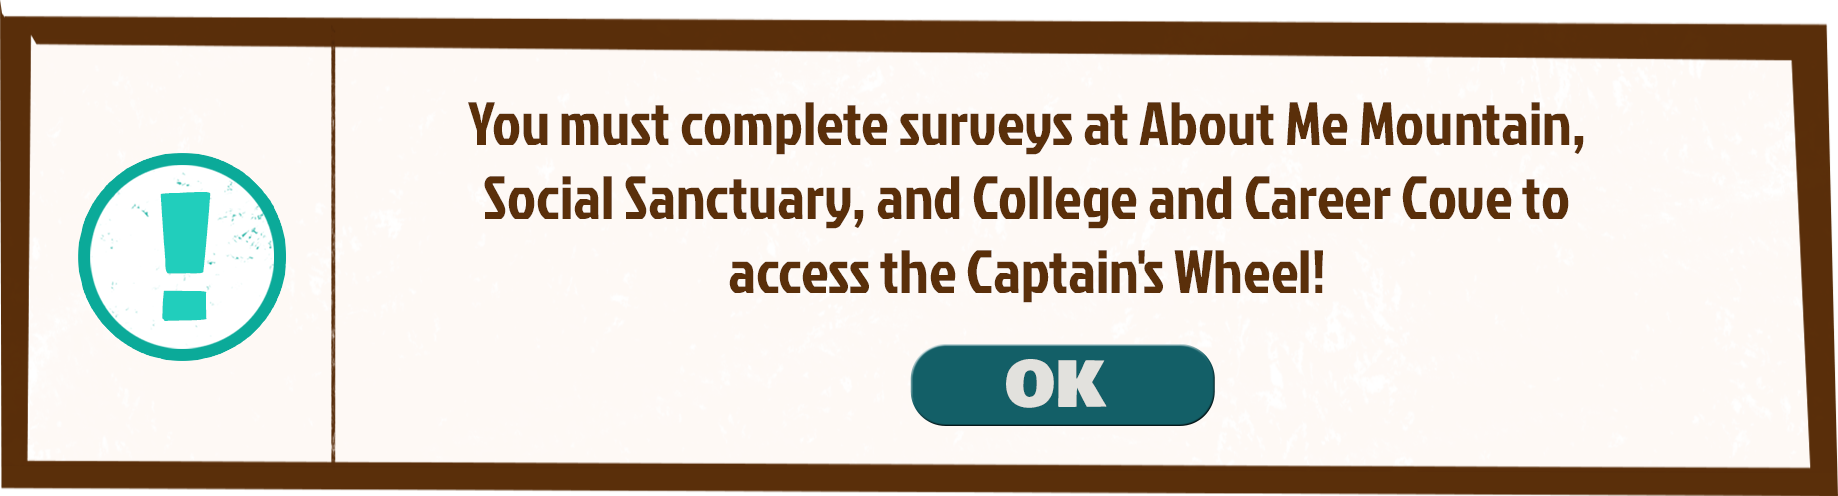 You must complete surveys at About Me Mountain, Social Sanctuary, and College and Career Cove to access the Captain's Wheel!